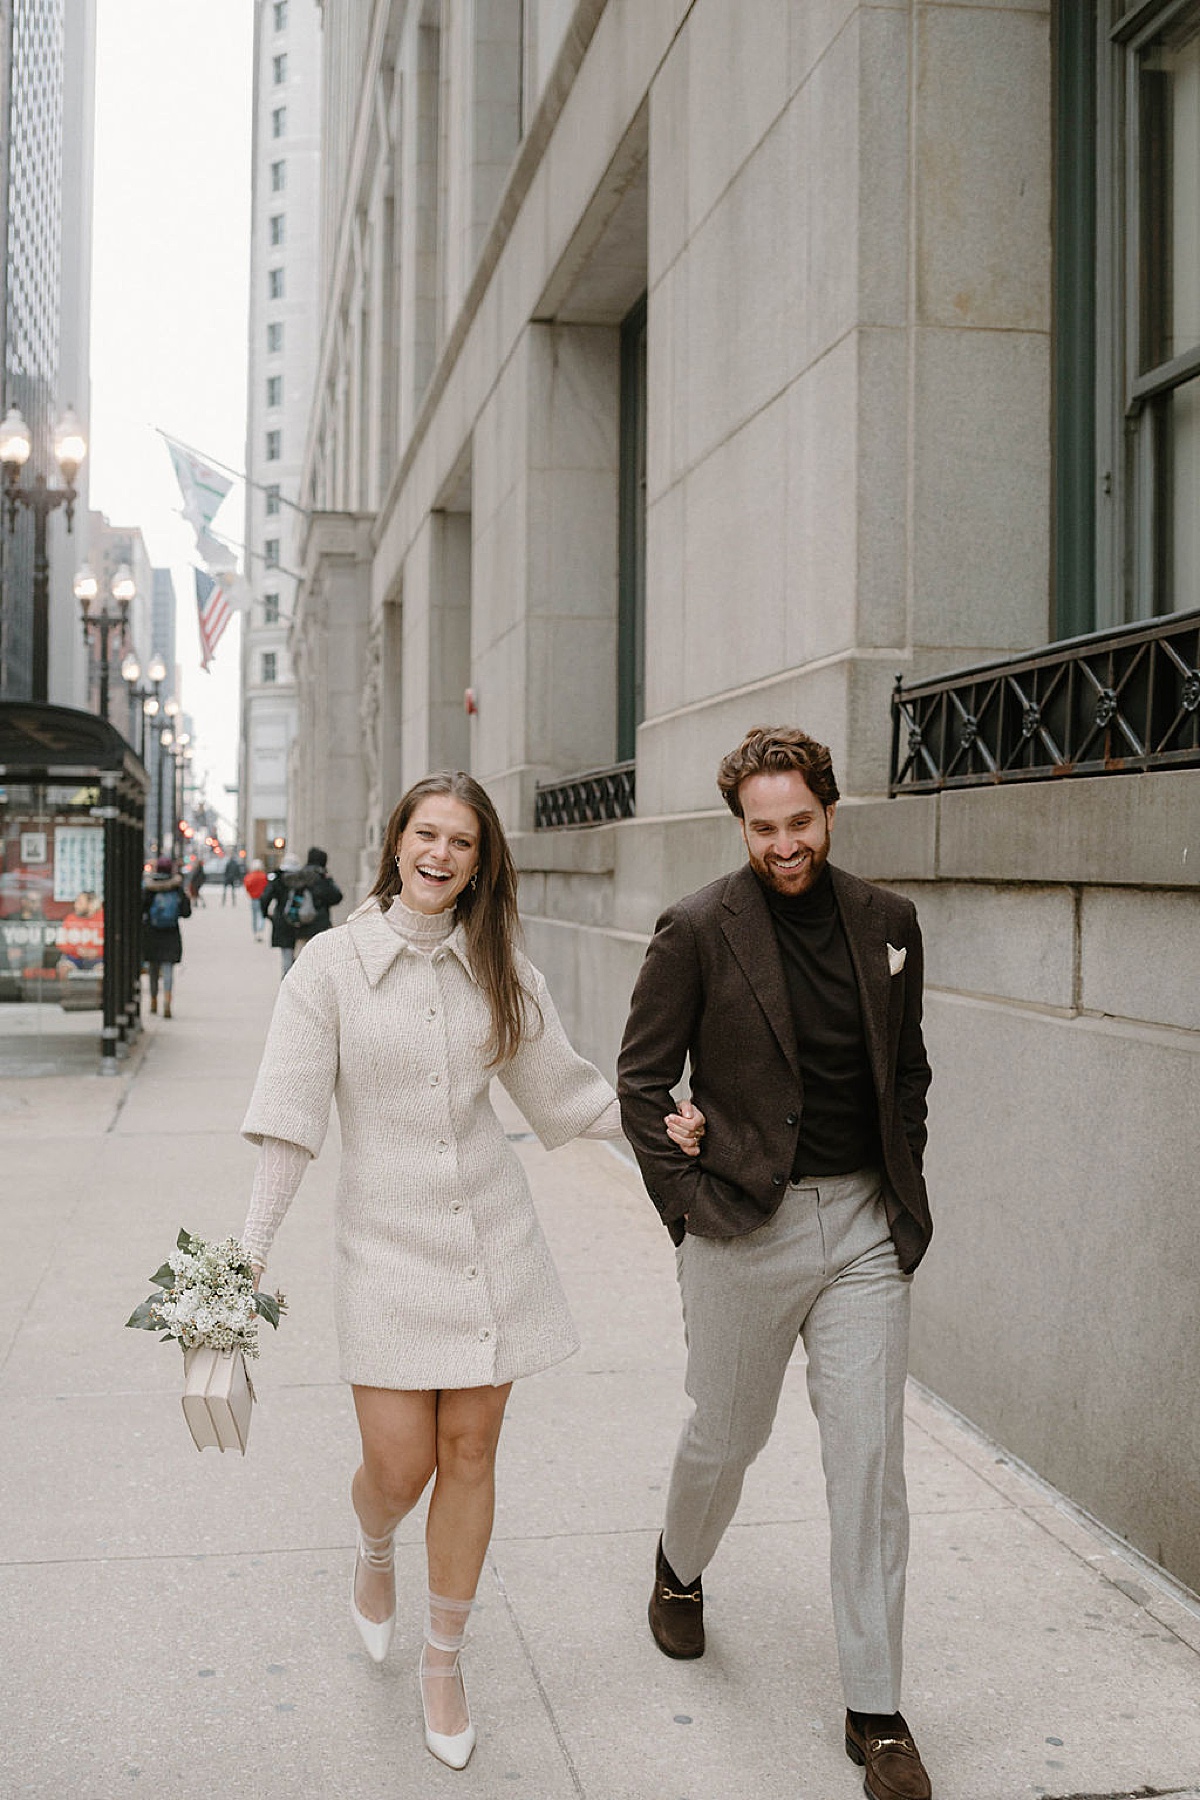 chic bride in boucle minidress and sheer socks and heels walks arm in arm with groom after Winter City Hall Elopement